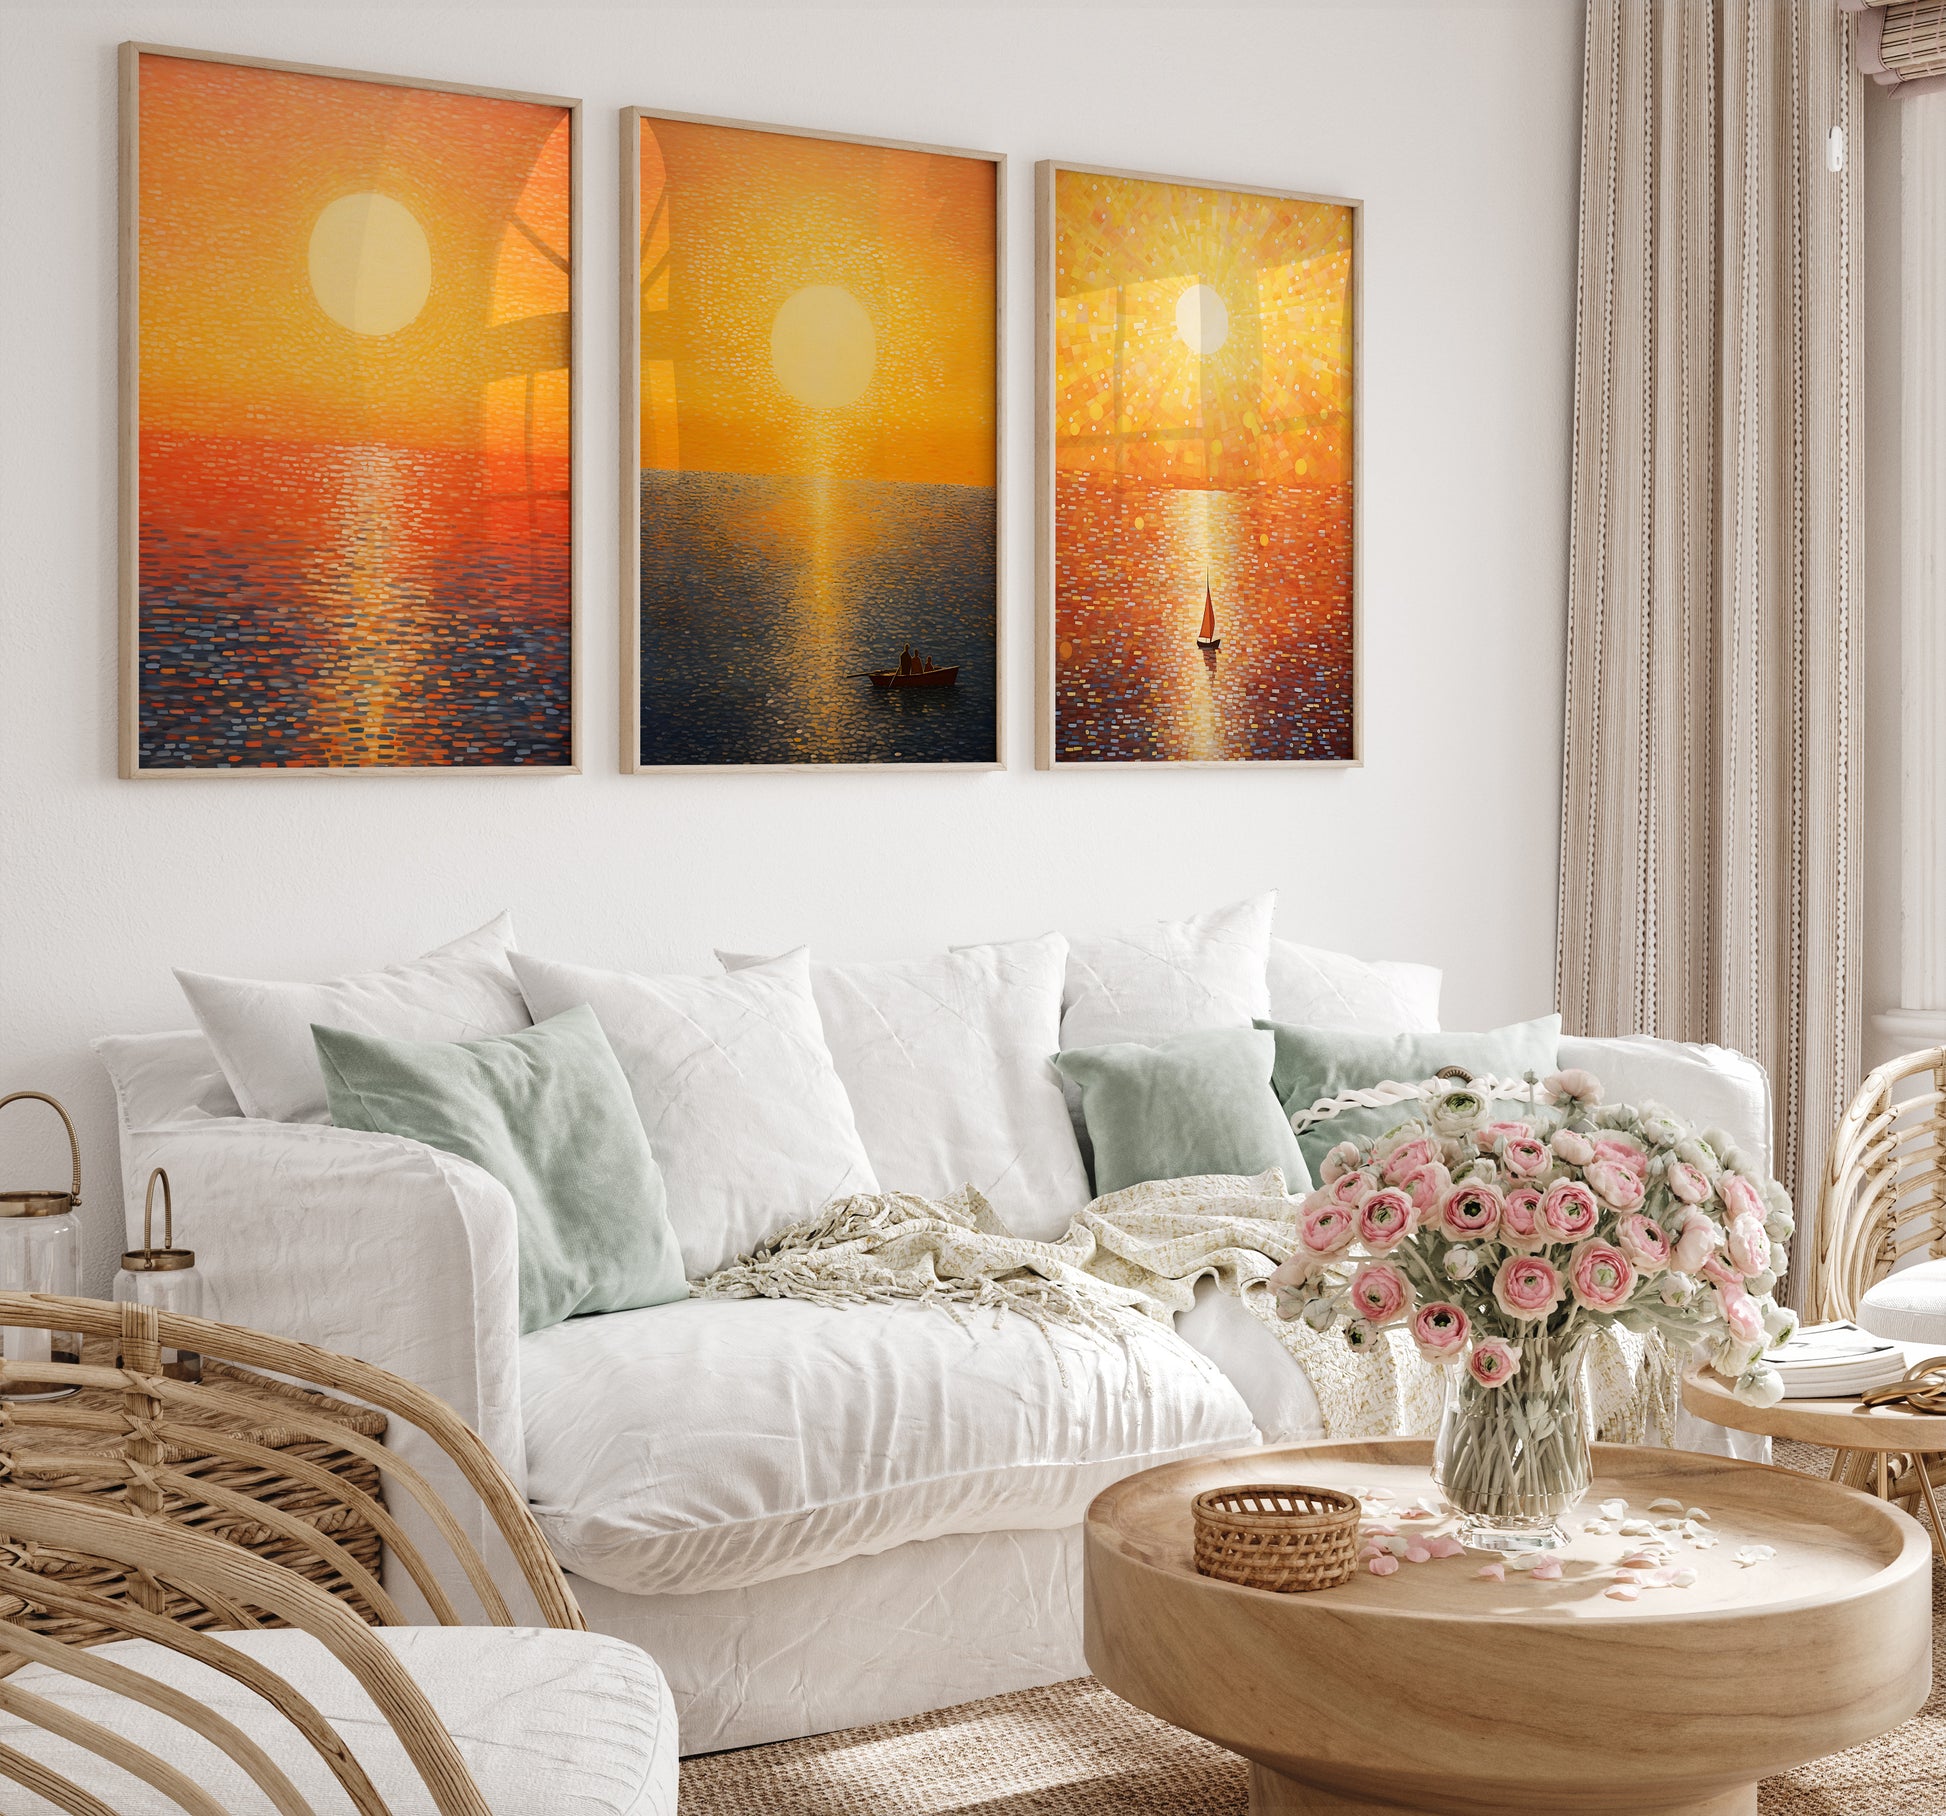 Three sunset canvas prints above a white bed with decorative pillows, next to a bouquet on a wooden table.